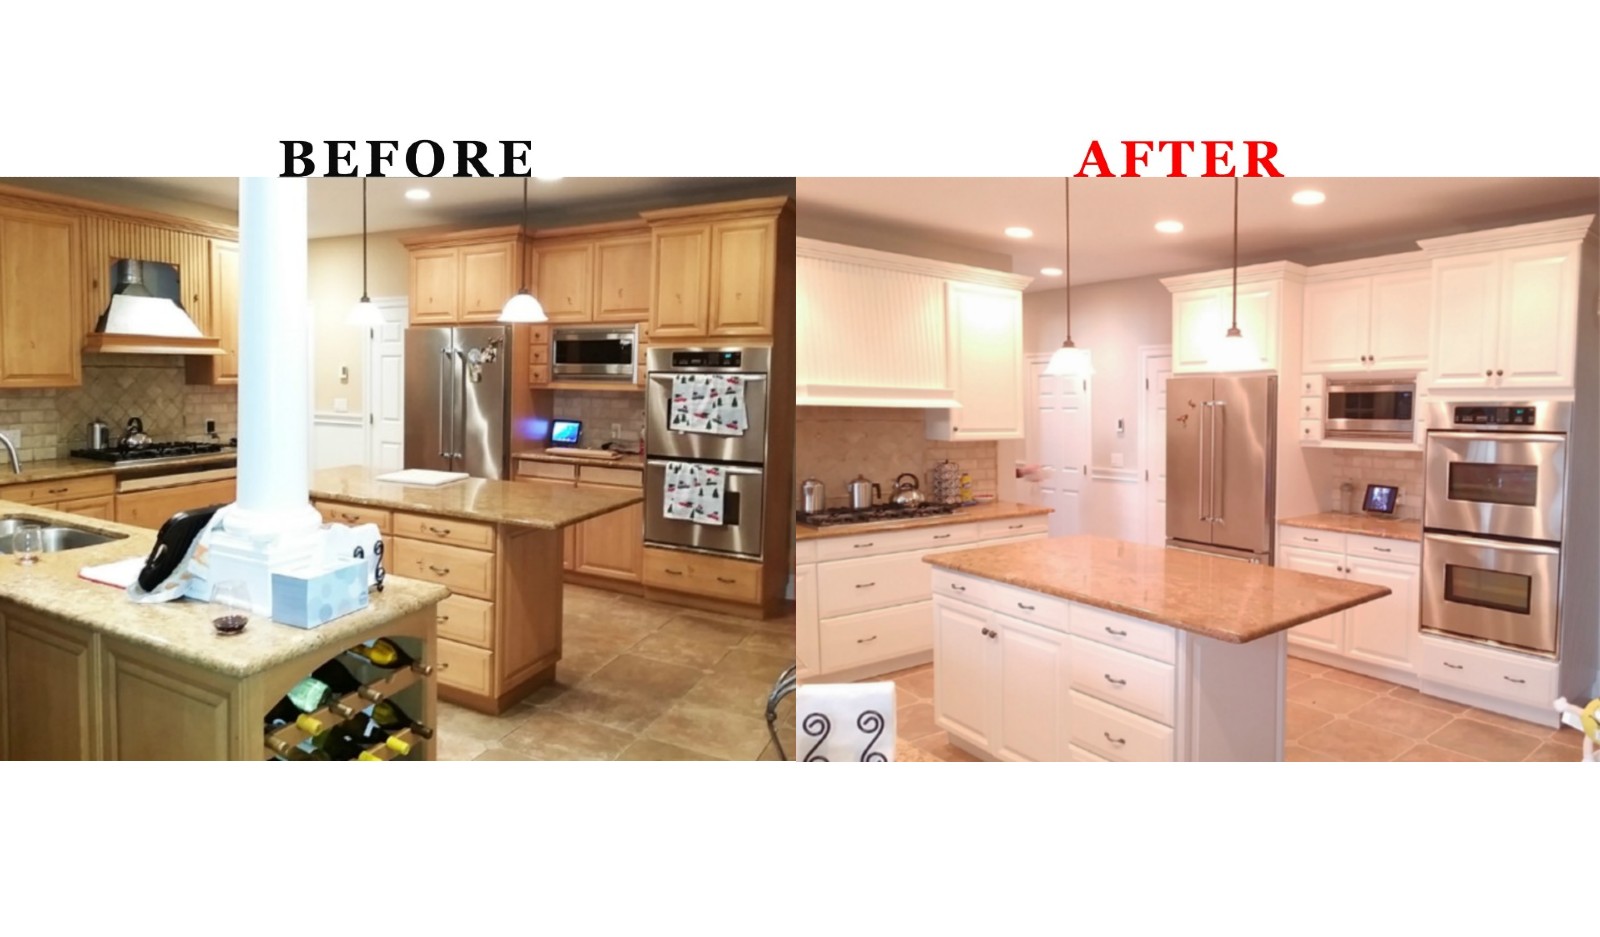 Painting Kitchen Cupboards Before And After Pictures Wow Blog